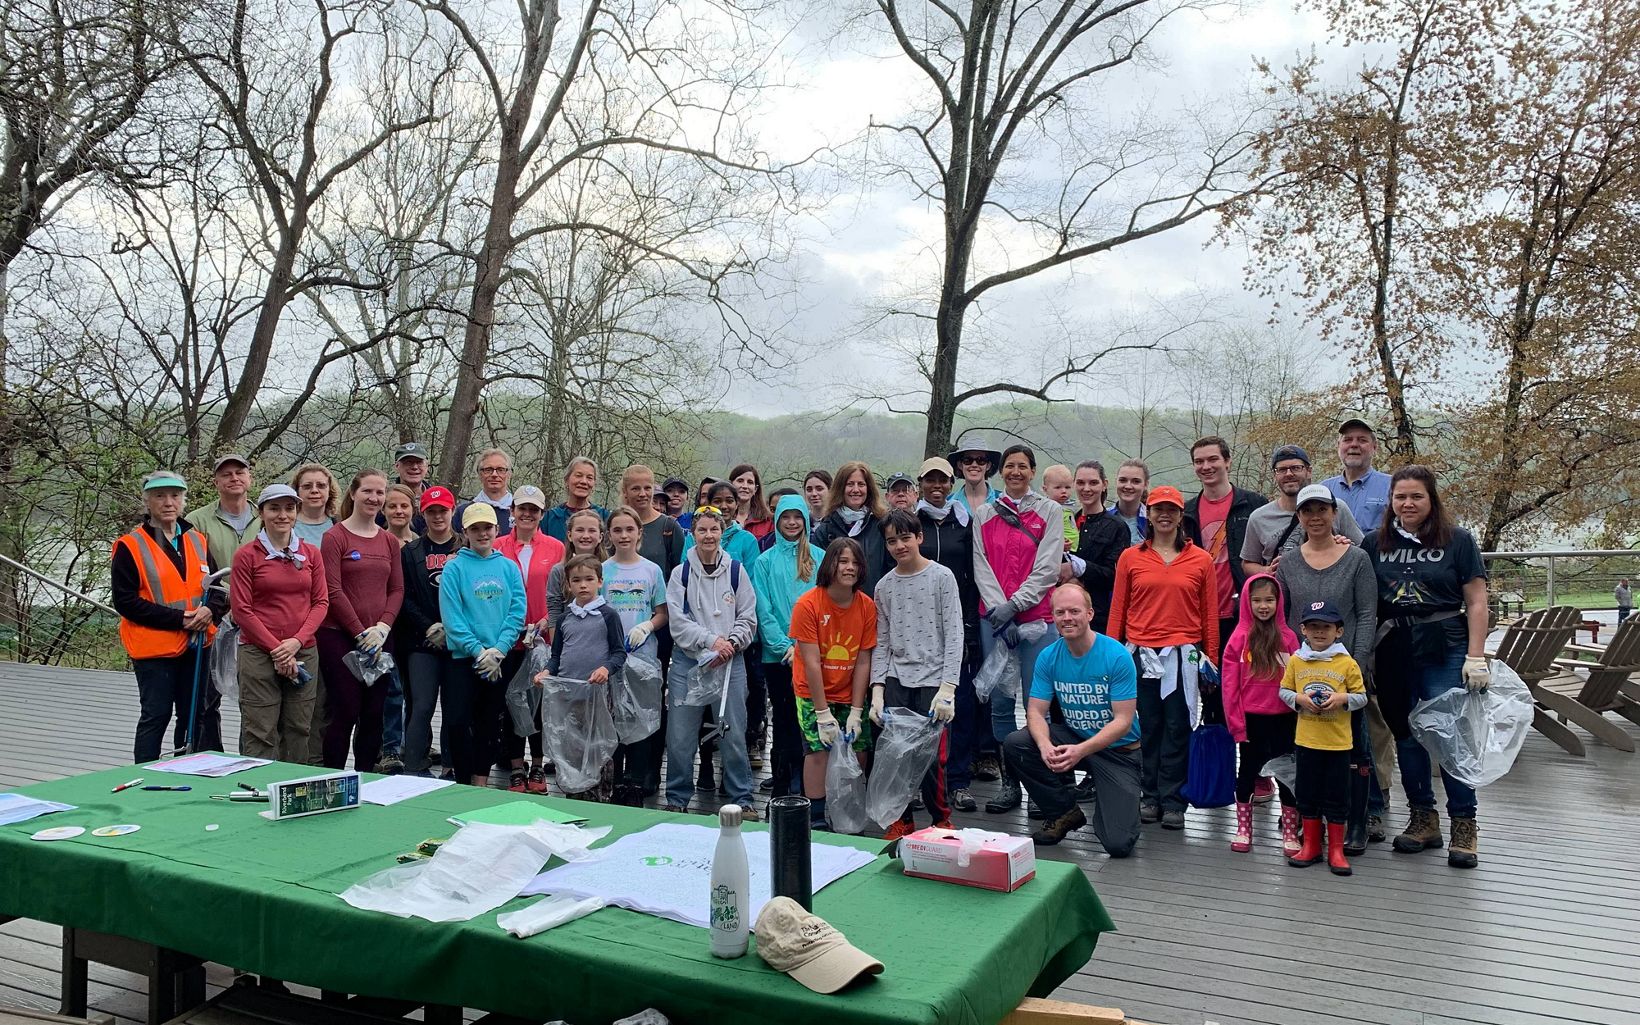 Fairfax County Cleanup 2019 40 volunteers collected 50 pounds of trash at Riverbend Park, including 50 golf balls. © Christopher Topik